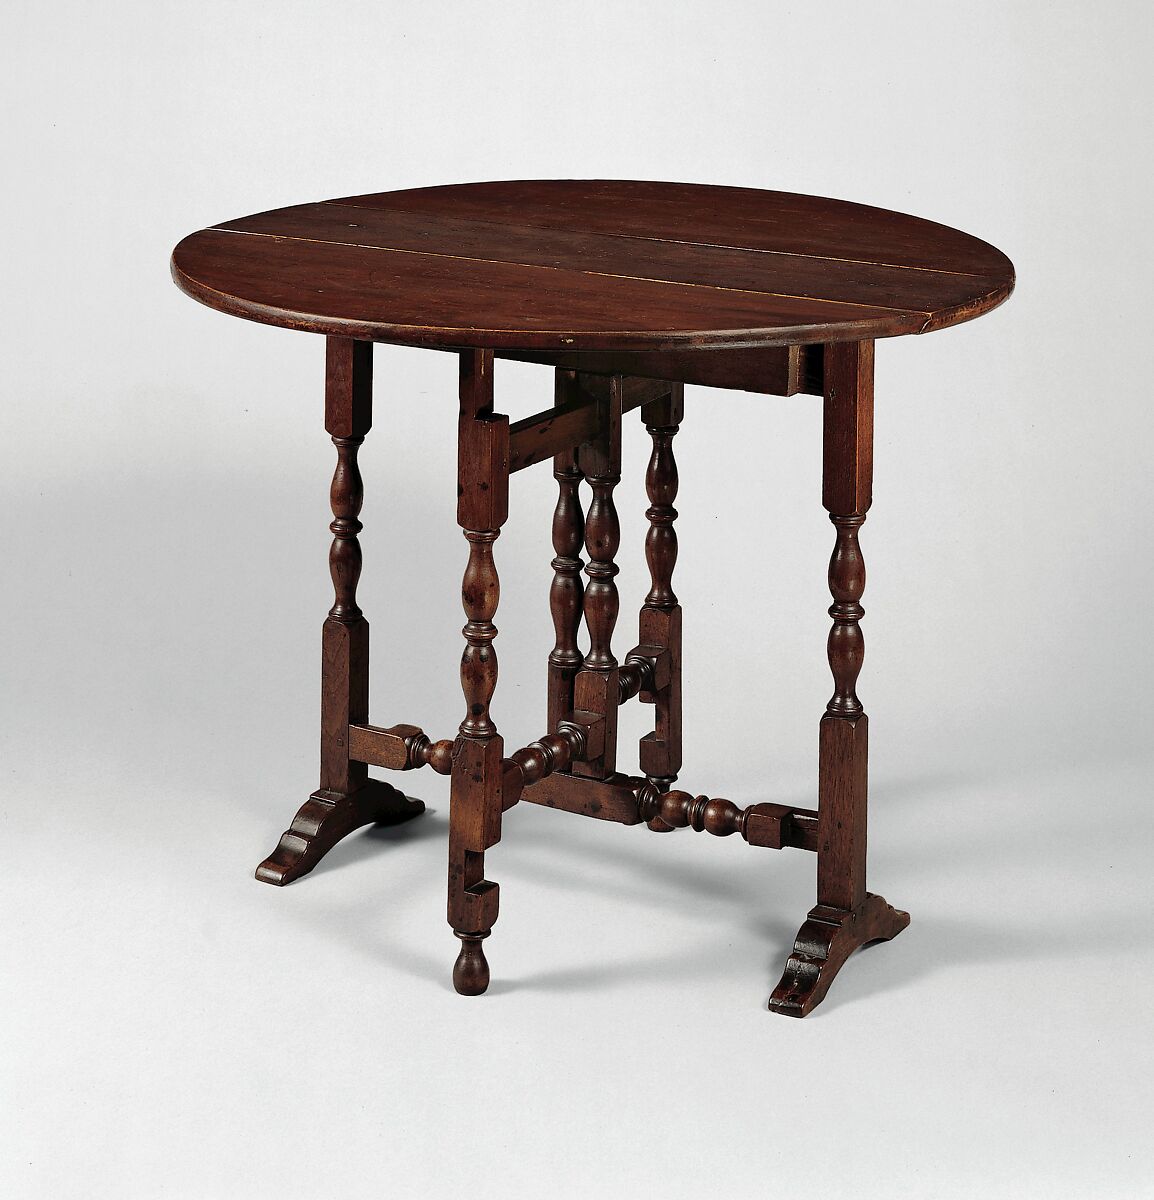 Oval table with falling leaves, Black walnut, white pine, American 